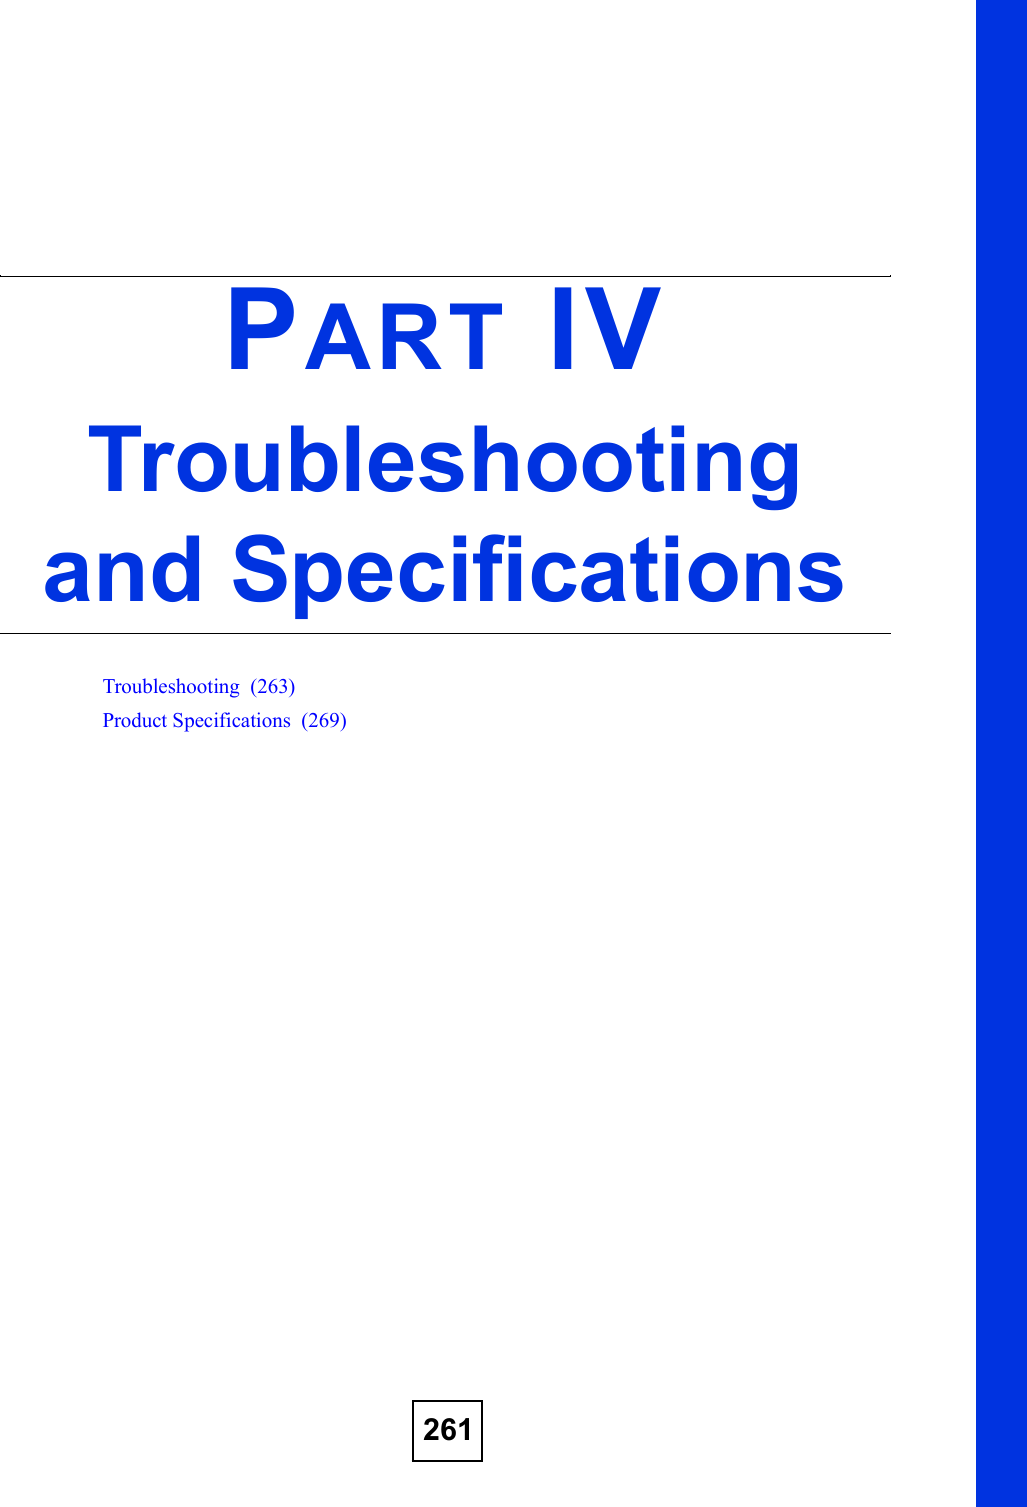 261PART IVTroubleshooting and SpecificationsTroubleshooting  (263)Product Specifications  (269)